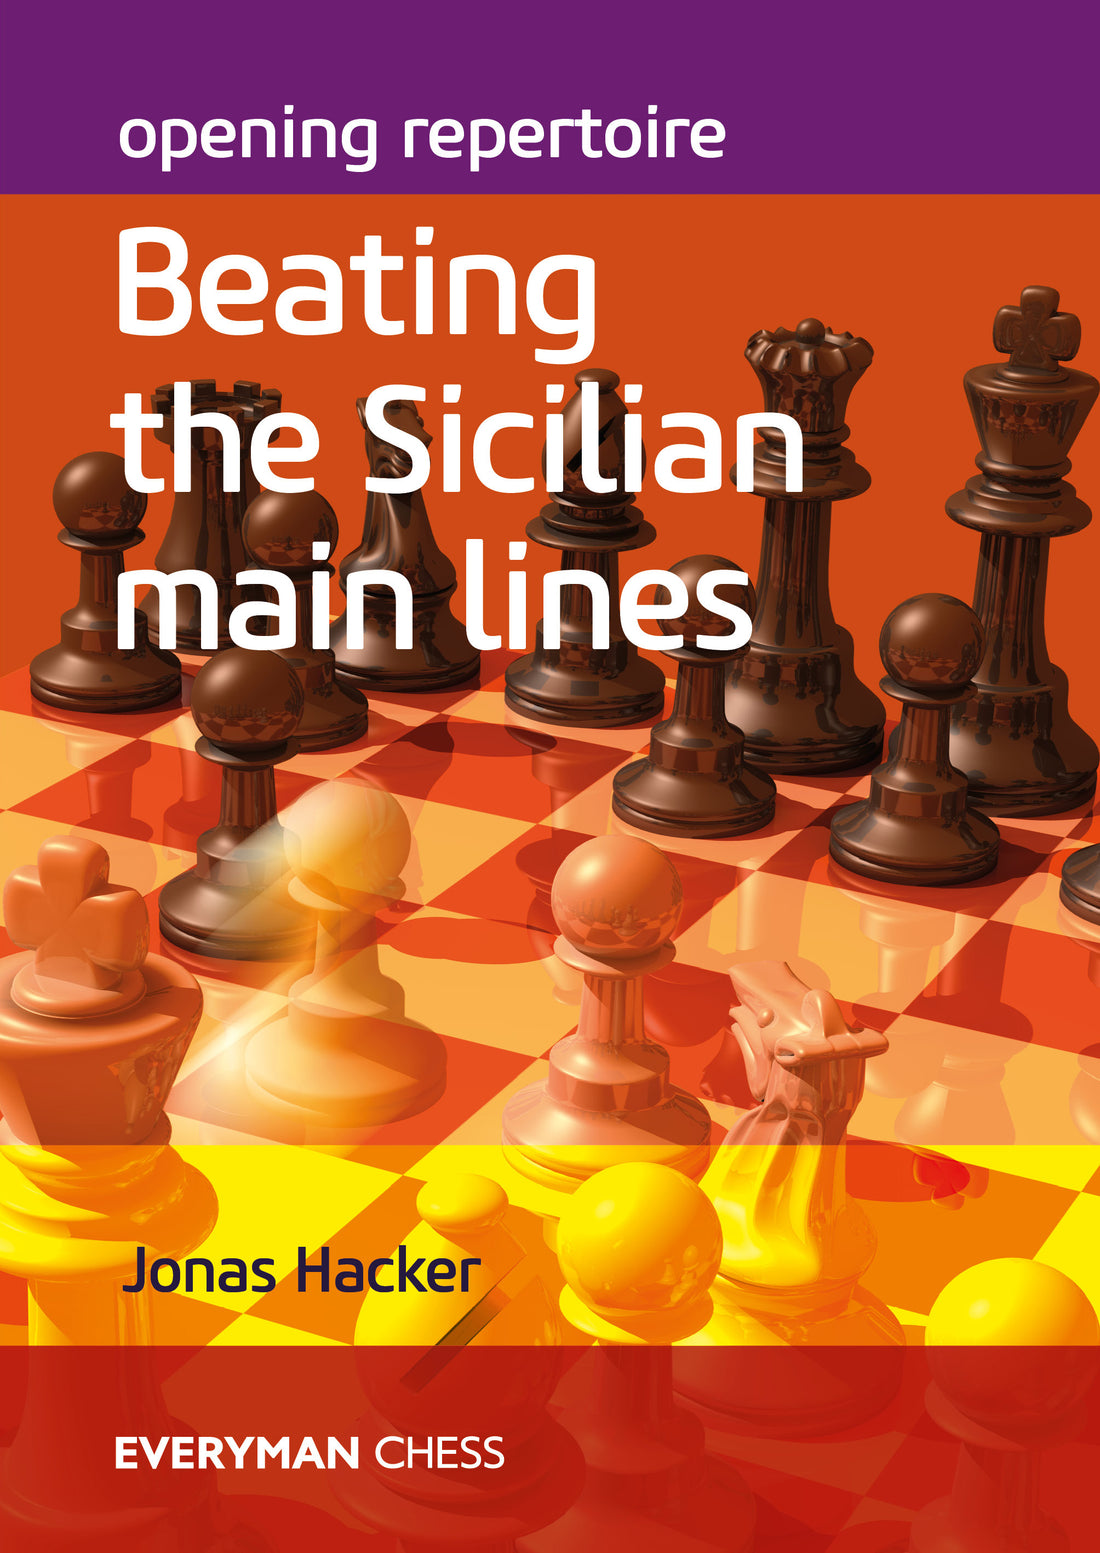 Play against the Sicilian defense